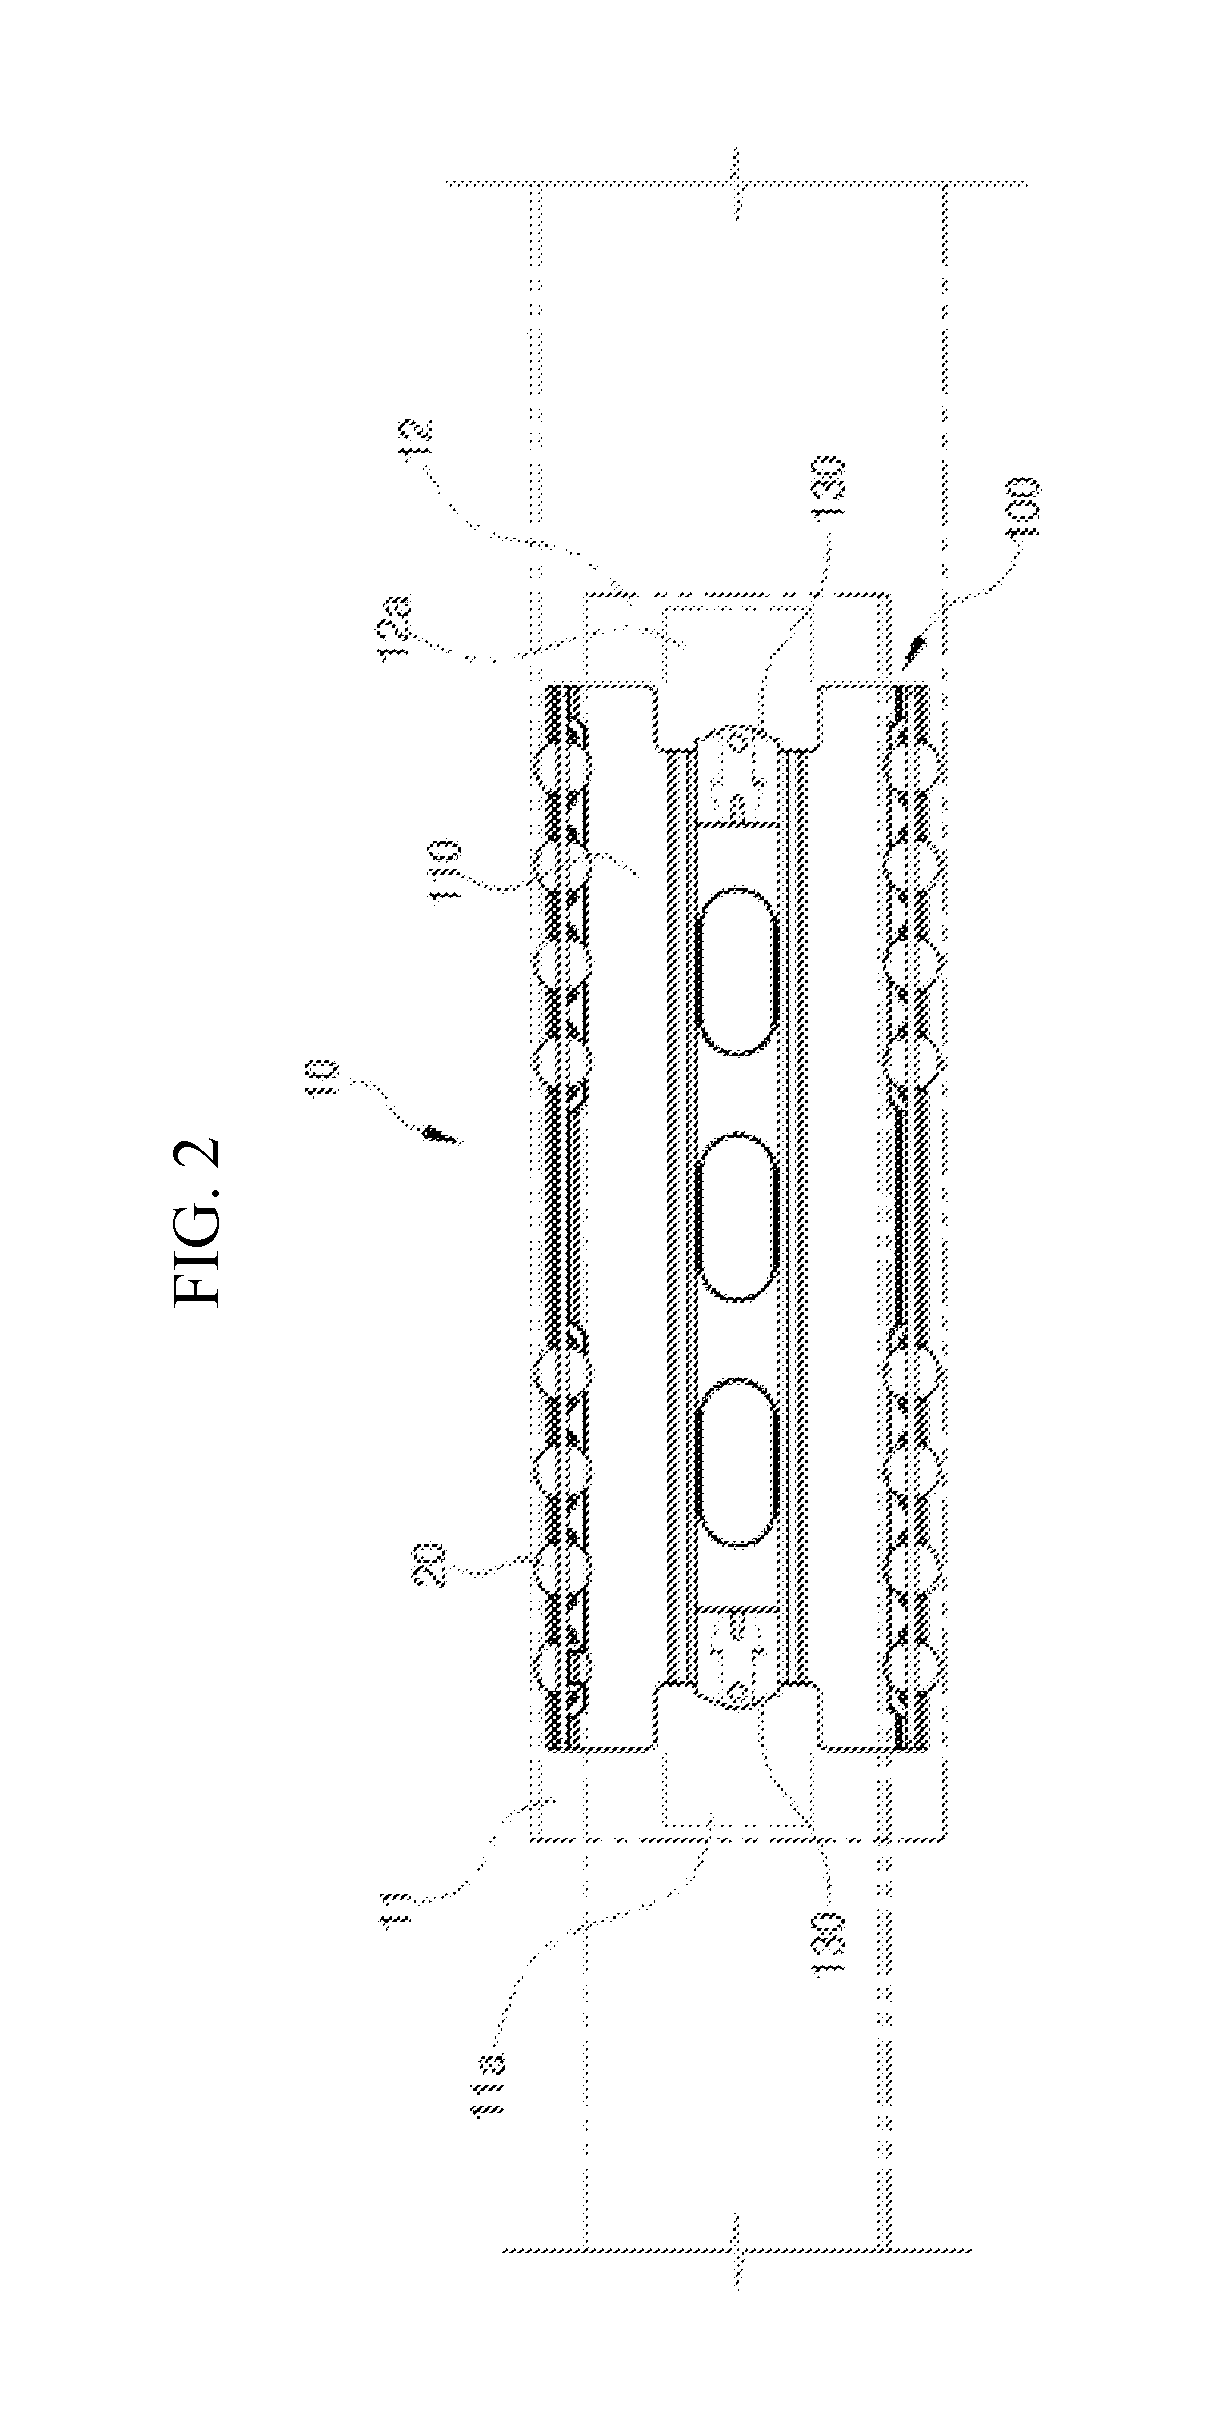 Retainer for sliding device provided with buffer member